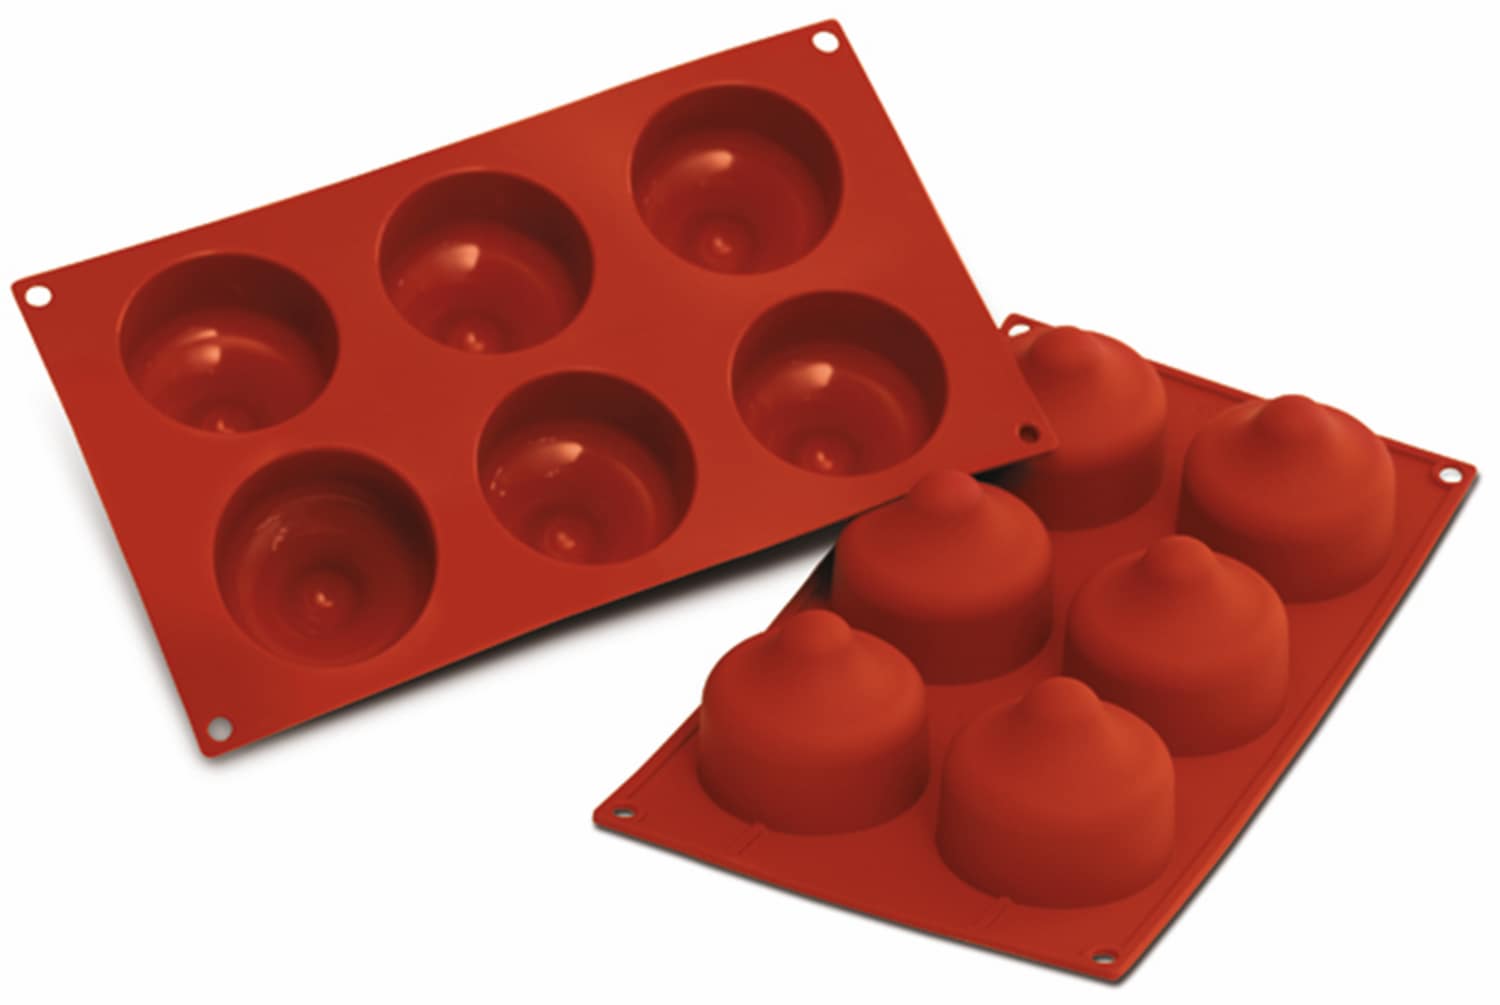 Silicone baking mould "Kiss" 300 x 175 mm